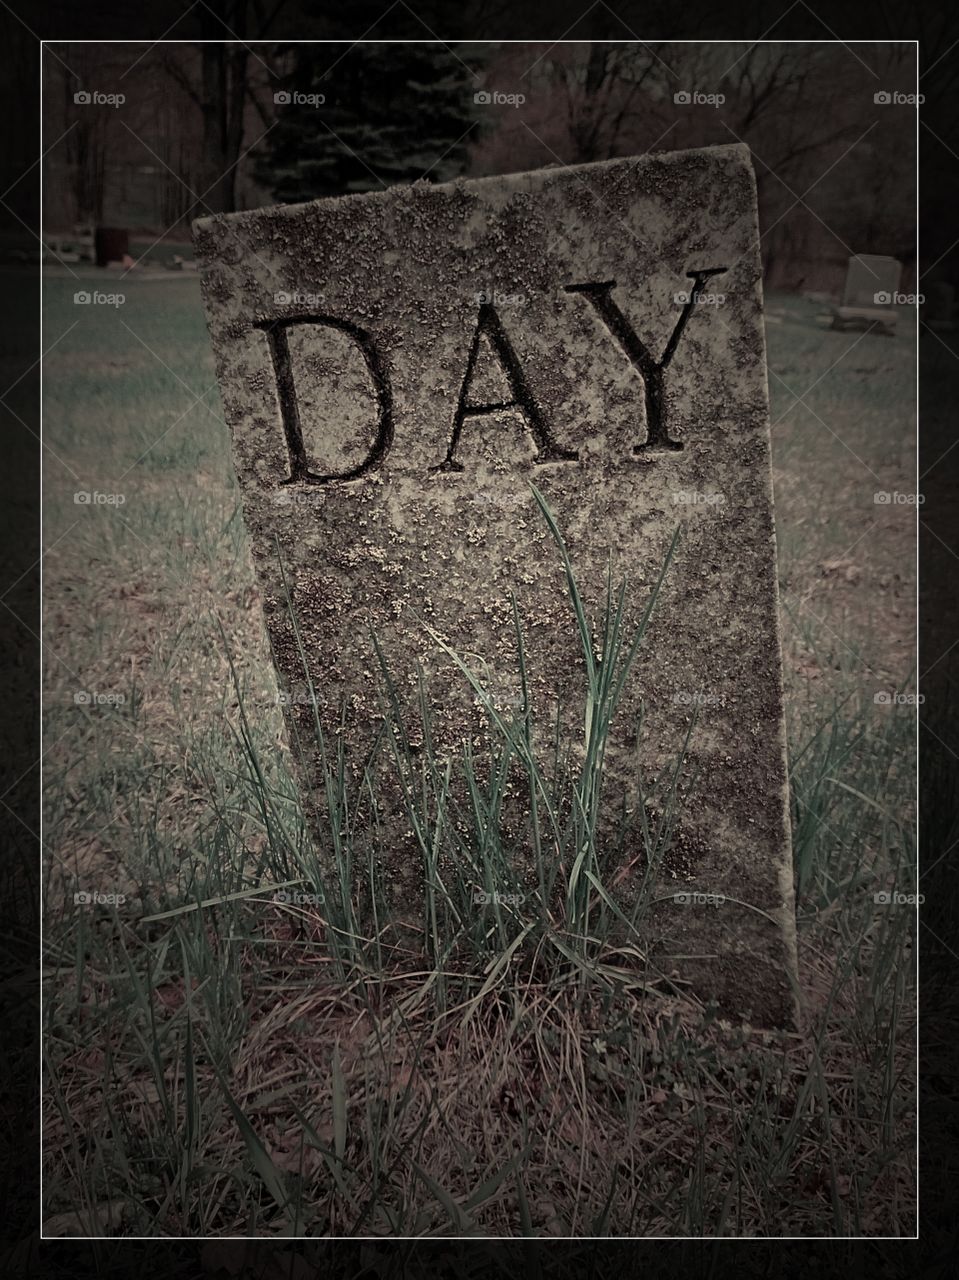 Day. I love cemeteries and gravestones.  The name really stood out.